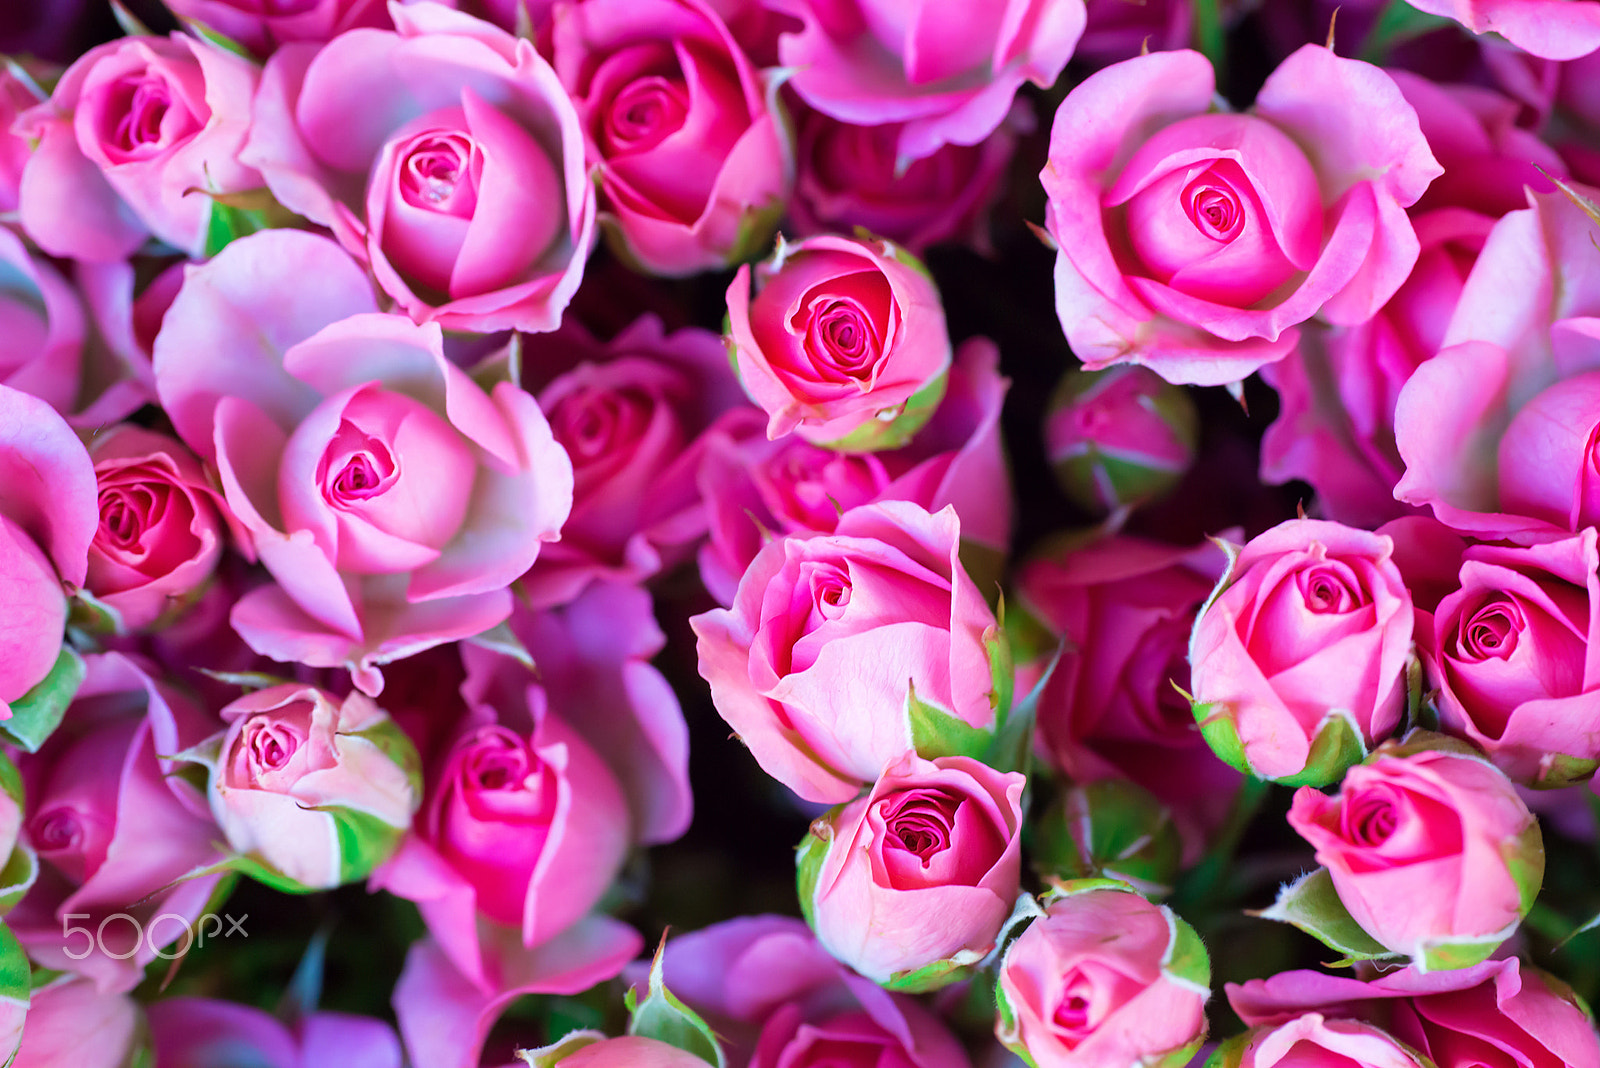 Nikon D800 sample photo. Fresh pink roses with green leaves photography